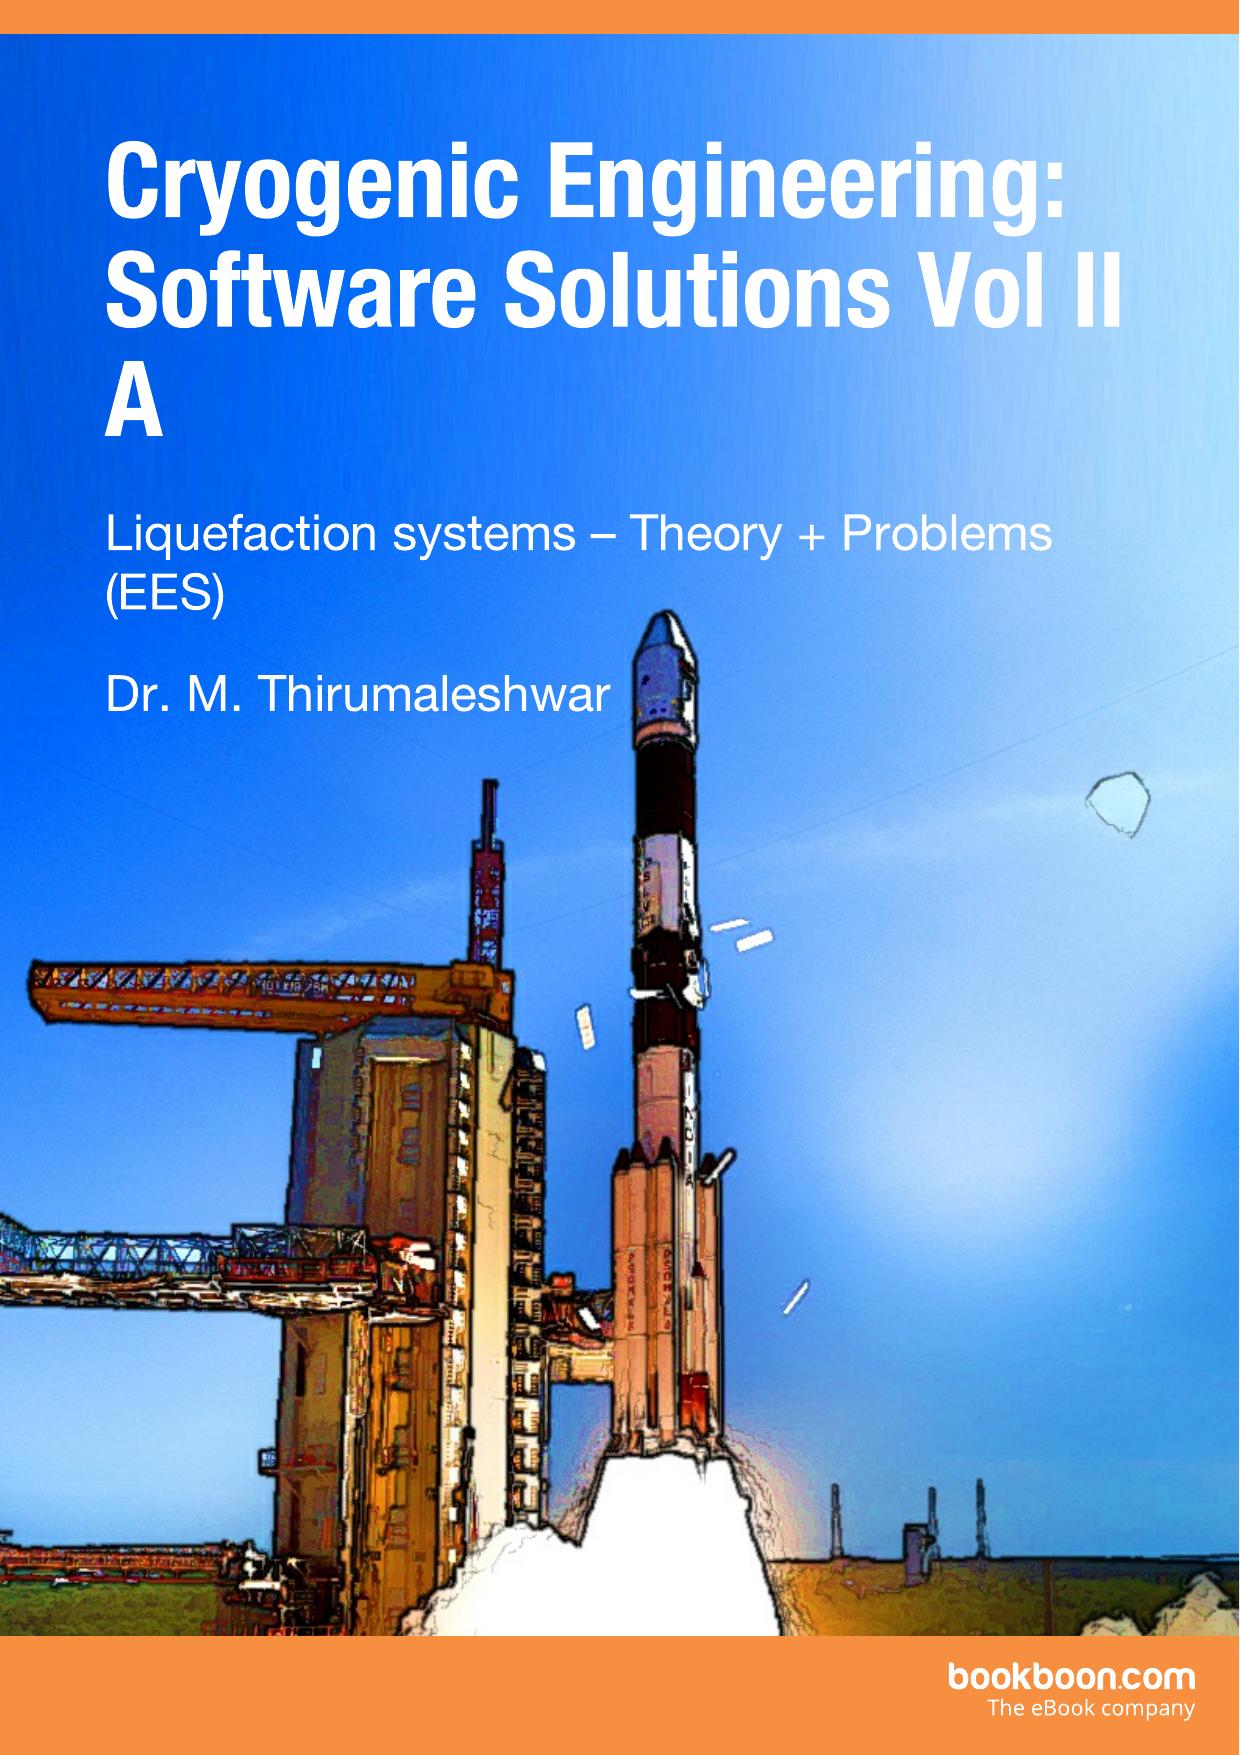 cryogenic-engineering-software-solutions-vol-ii-A 2016